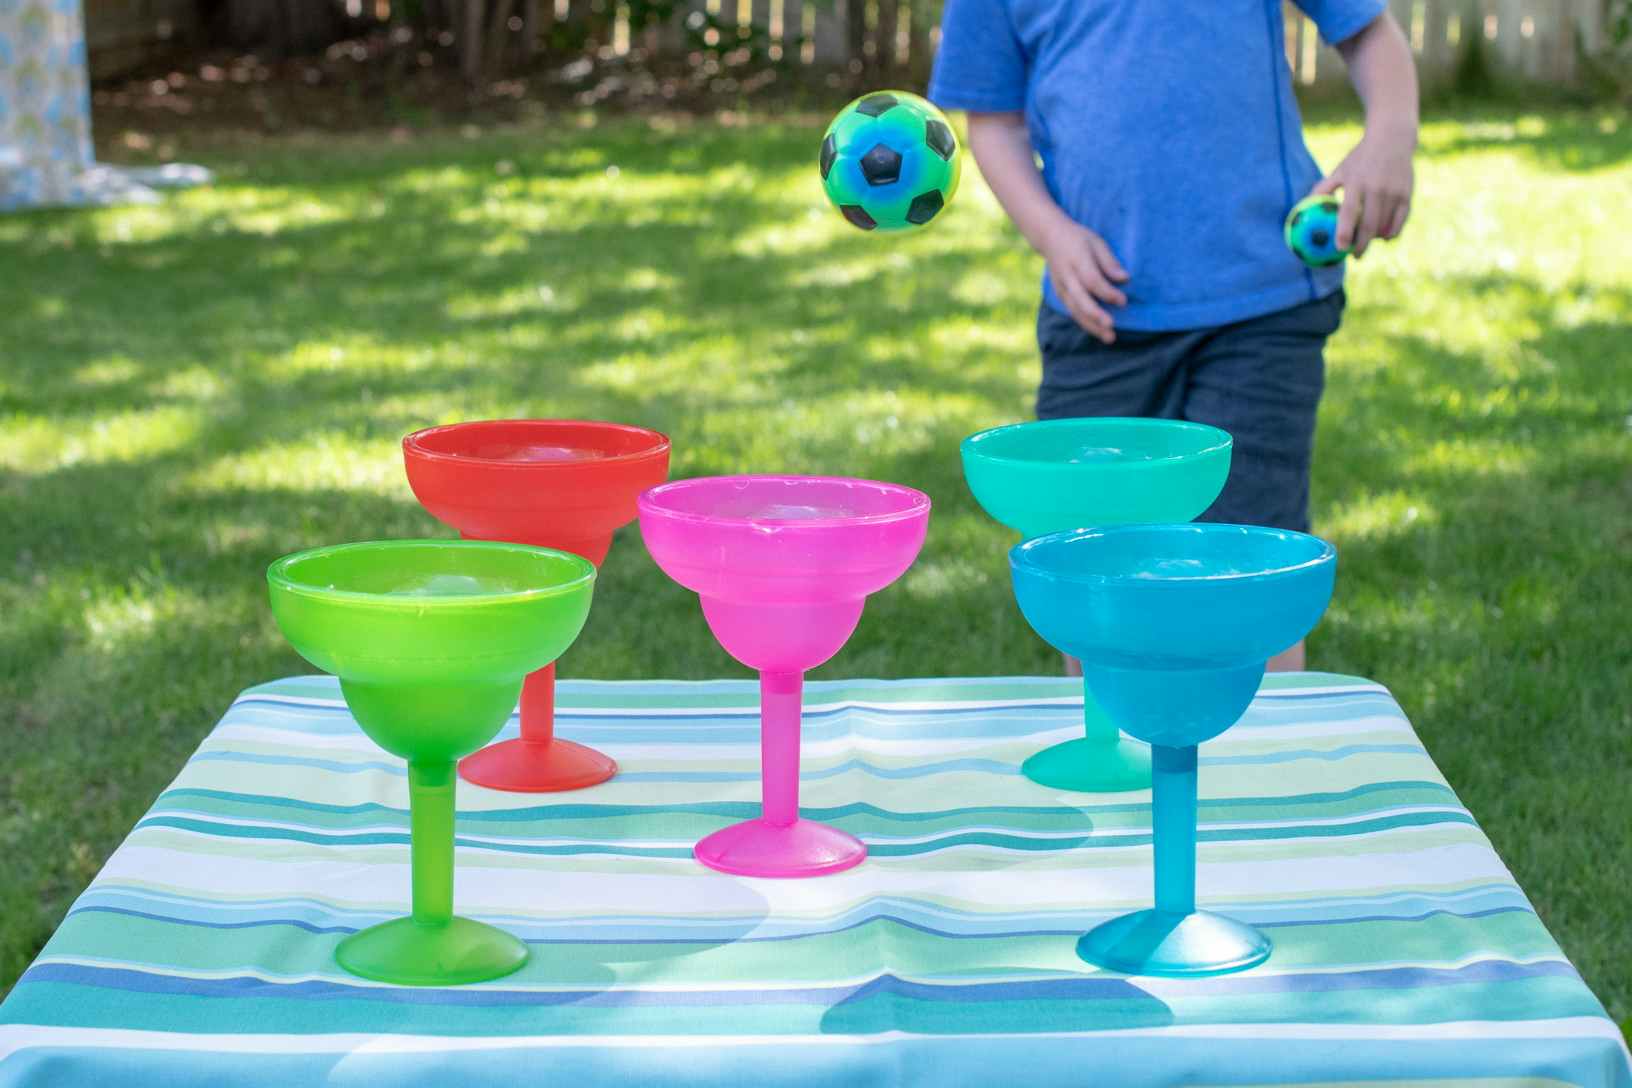 Five colorful, plastic margarita cups sitting on a table in a backyard while a child is throwing balls trying to get one in a cup.